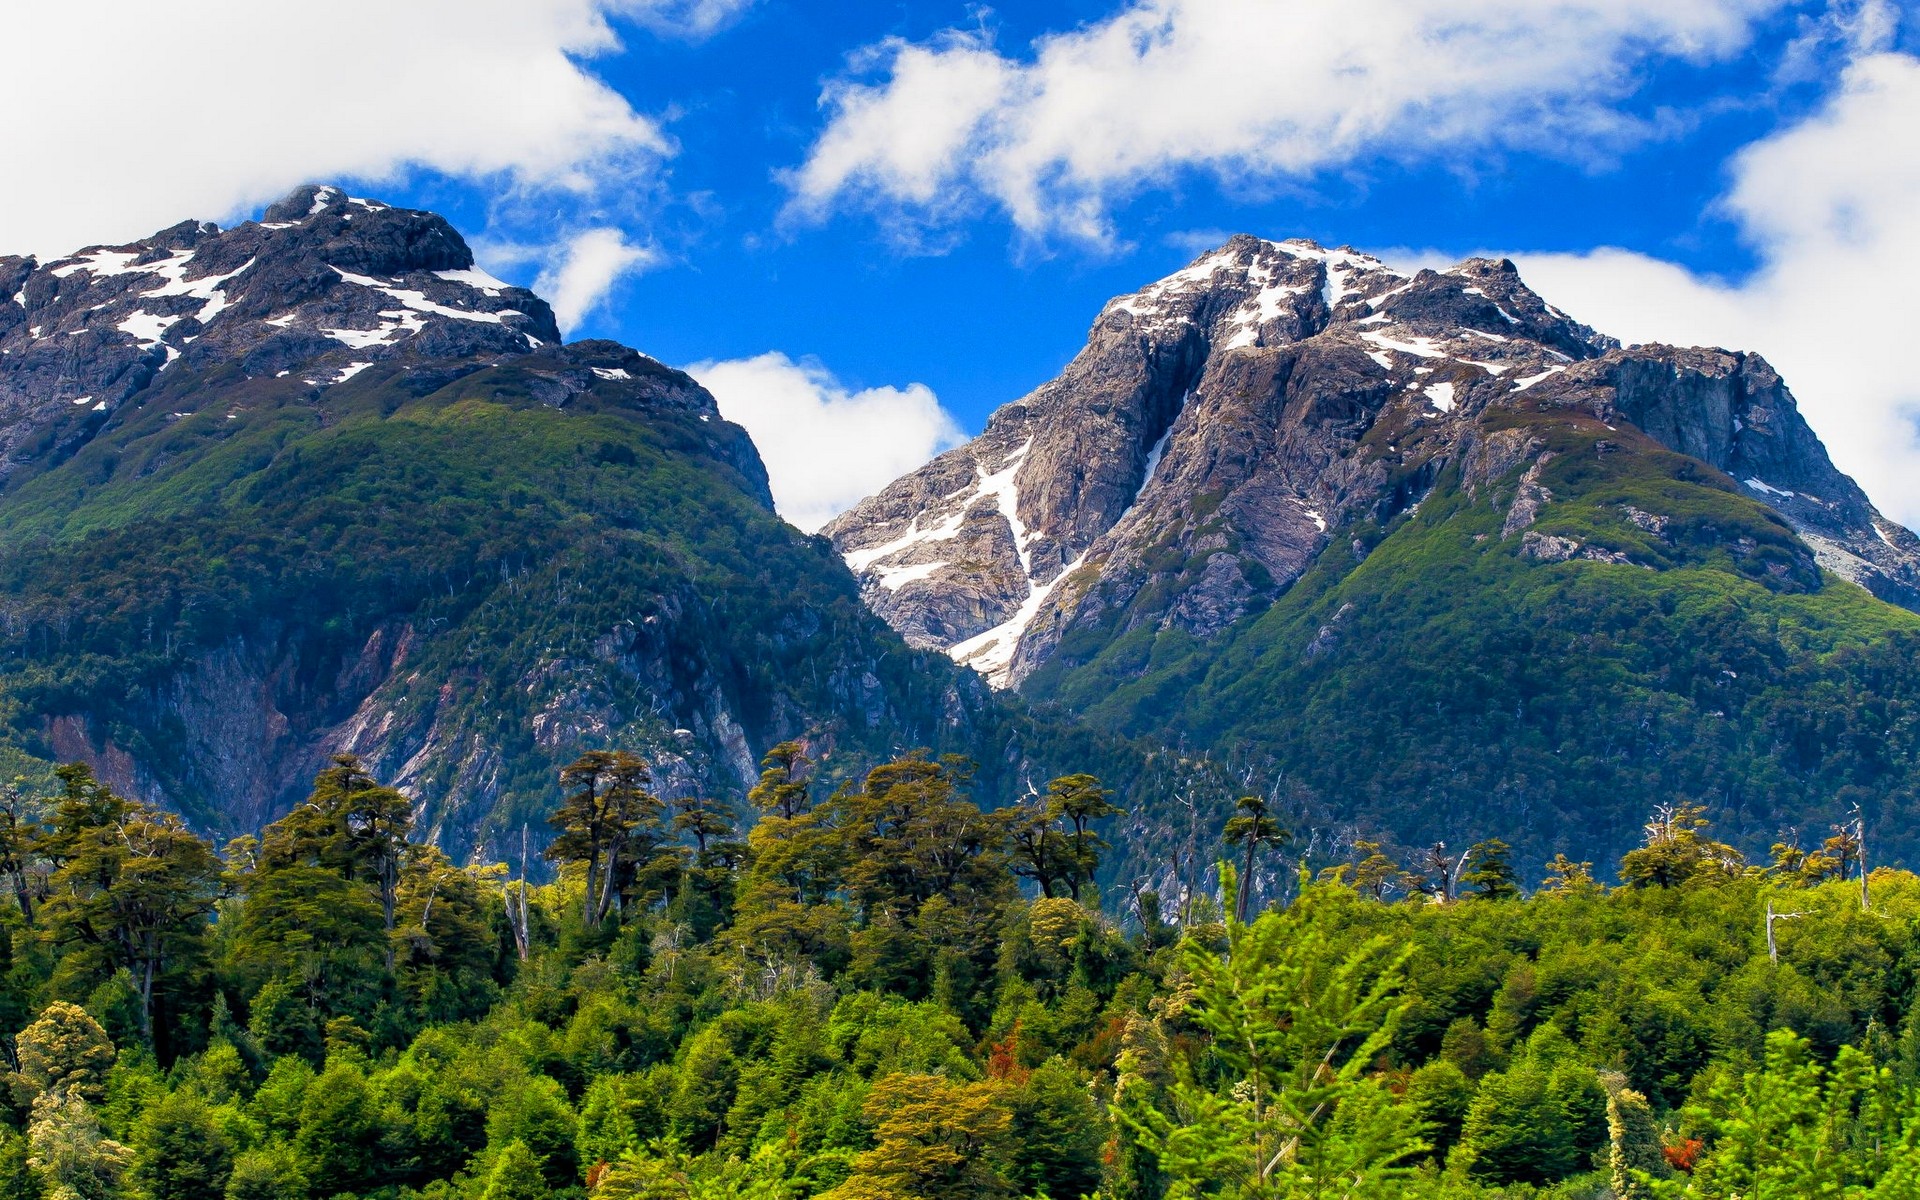 General 1920x1200 landscape nature Chile summer mountains forest clouds Patagonia snowy peak trees green South America